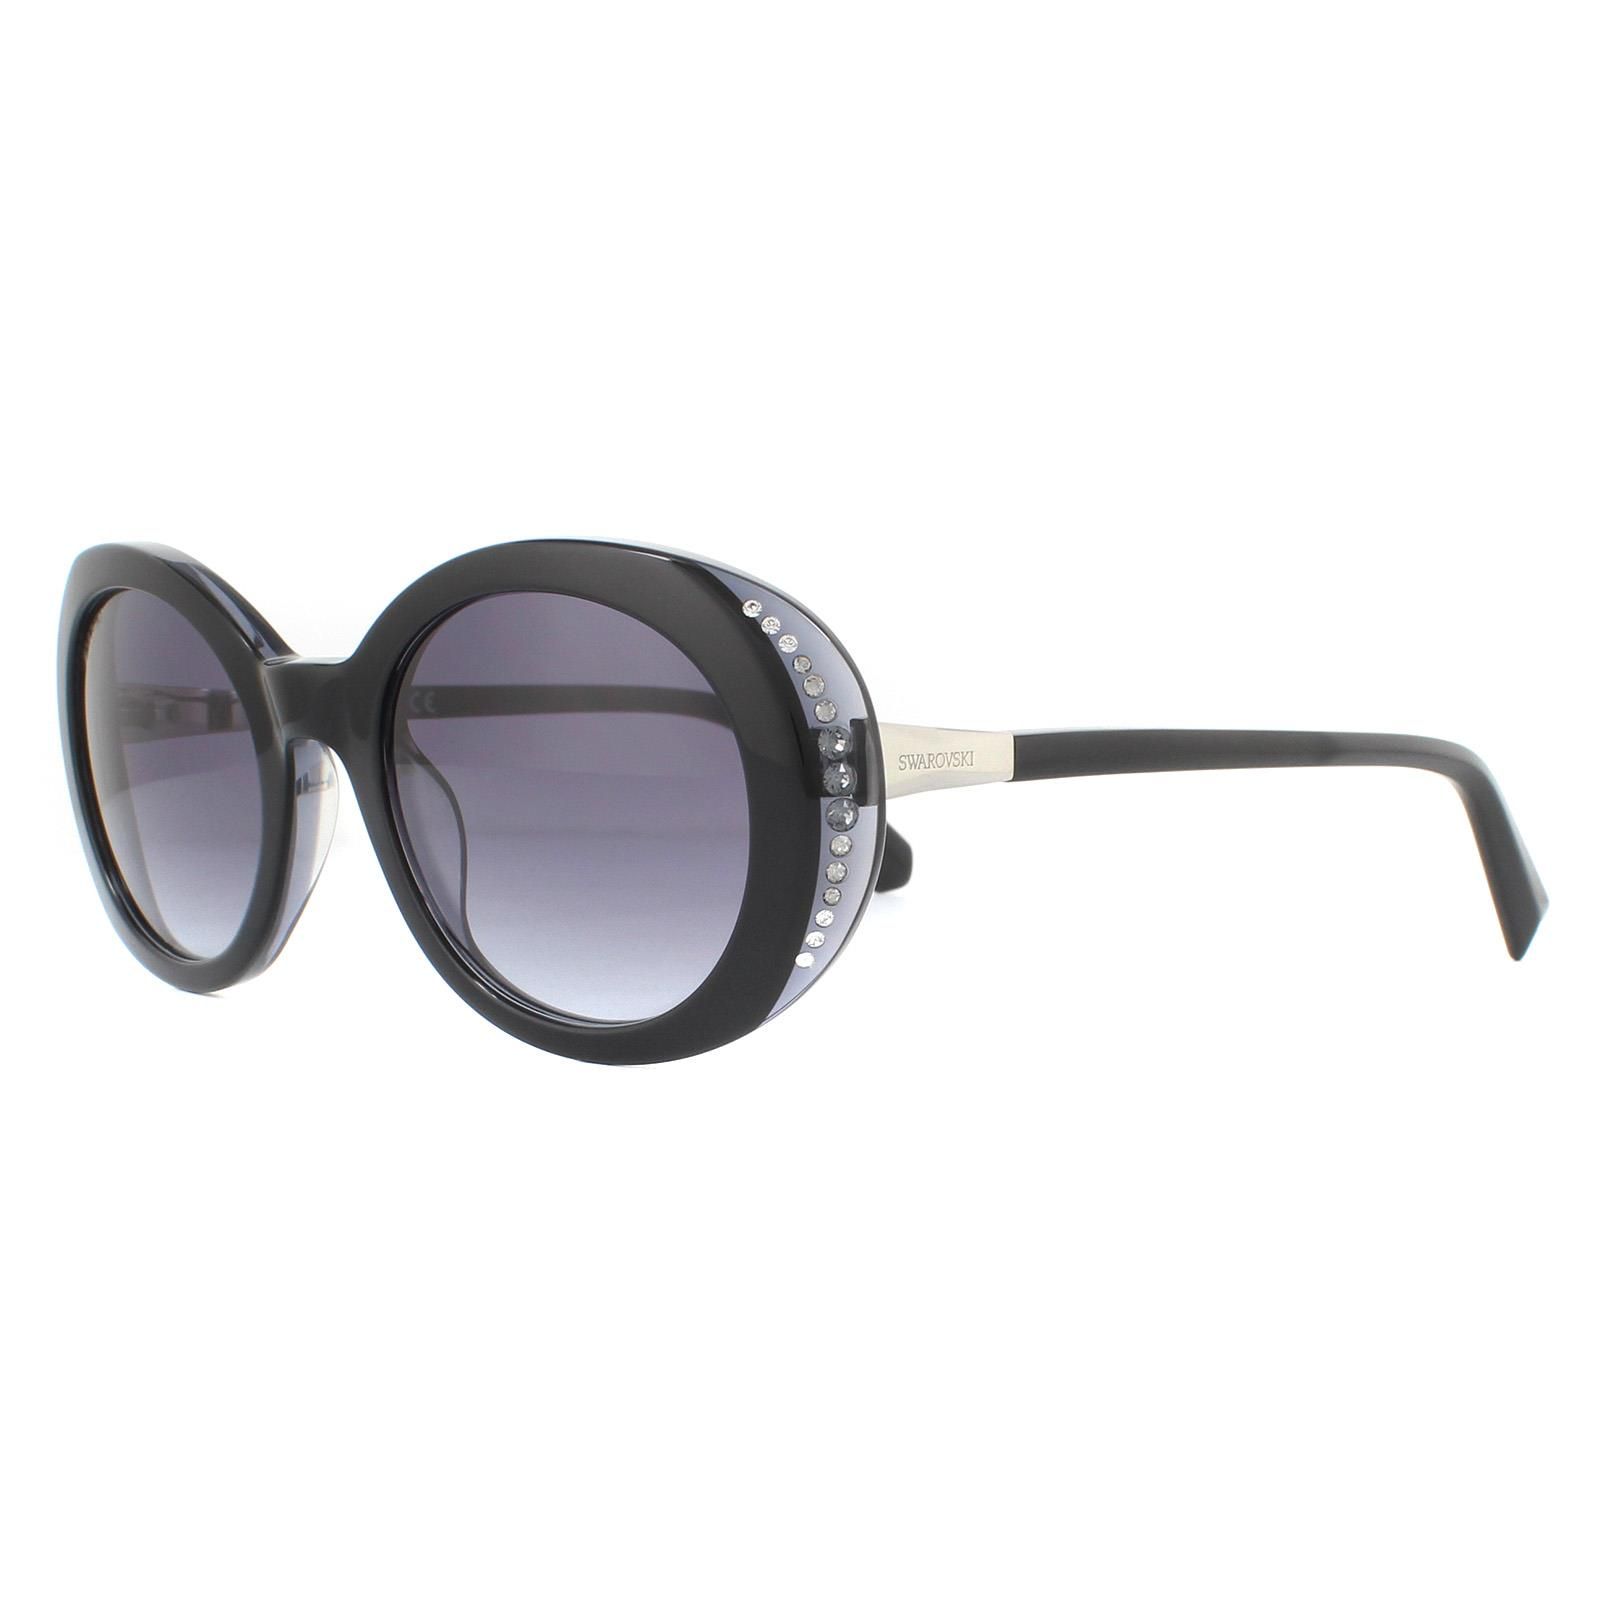 Swarovski Sunglasses SK0281/S 05B Black Grey Gradient are an elegant oval design crafted from lightweight acetate and embellished with Swarovski crystals on the outer edges of the frame with Swarovski logos engraved into the hinges.